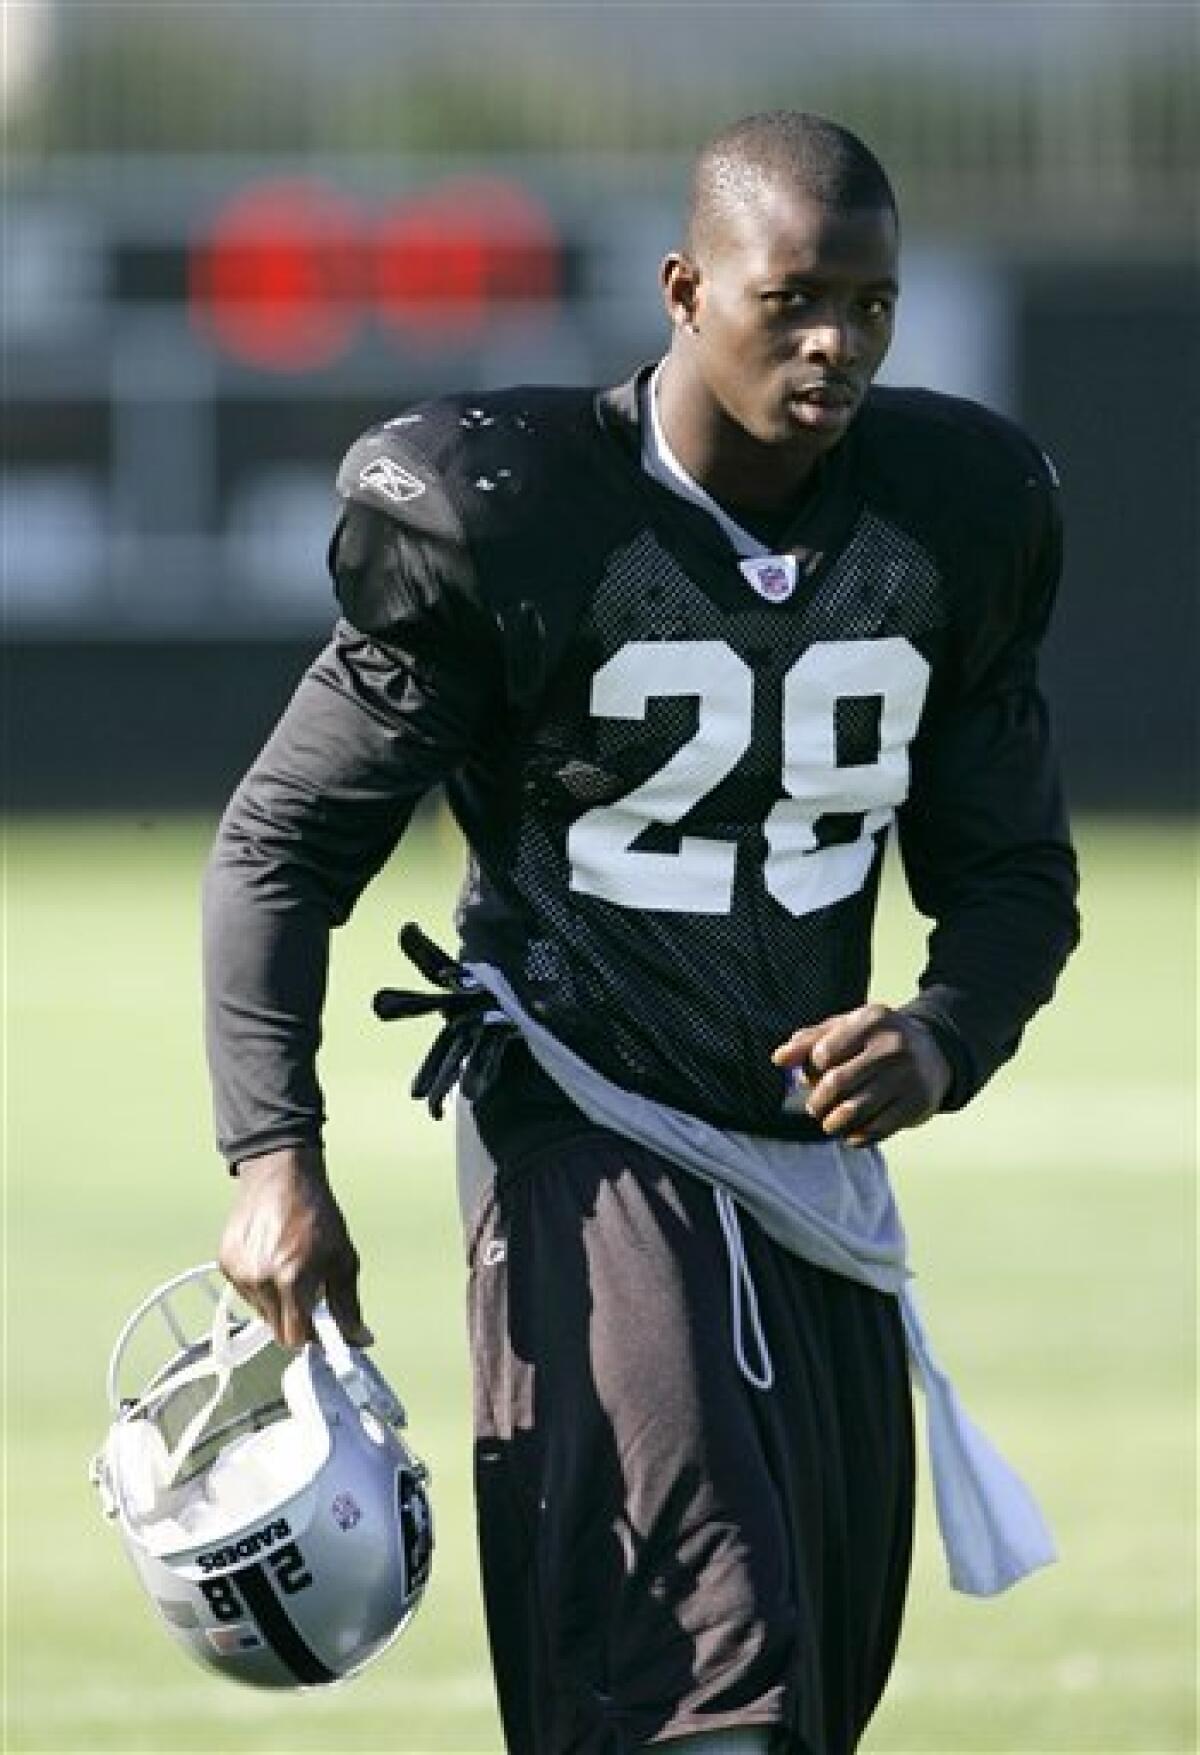 In this July 31, 2008, file photo, Oakland Raiders safety Gibril Wilson is seen during football training camp in Napa, Calif. Wilson, a five-year veteran released last week by the Oakland Raiders, signed a $27.5 million, five-year deal with the Miami Dolphins. (AP Photo/Eric Risberg, File)